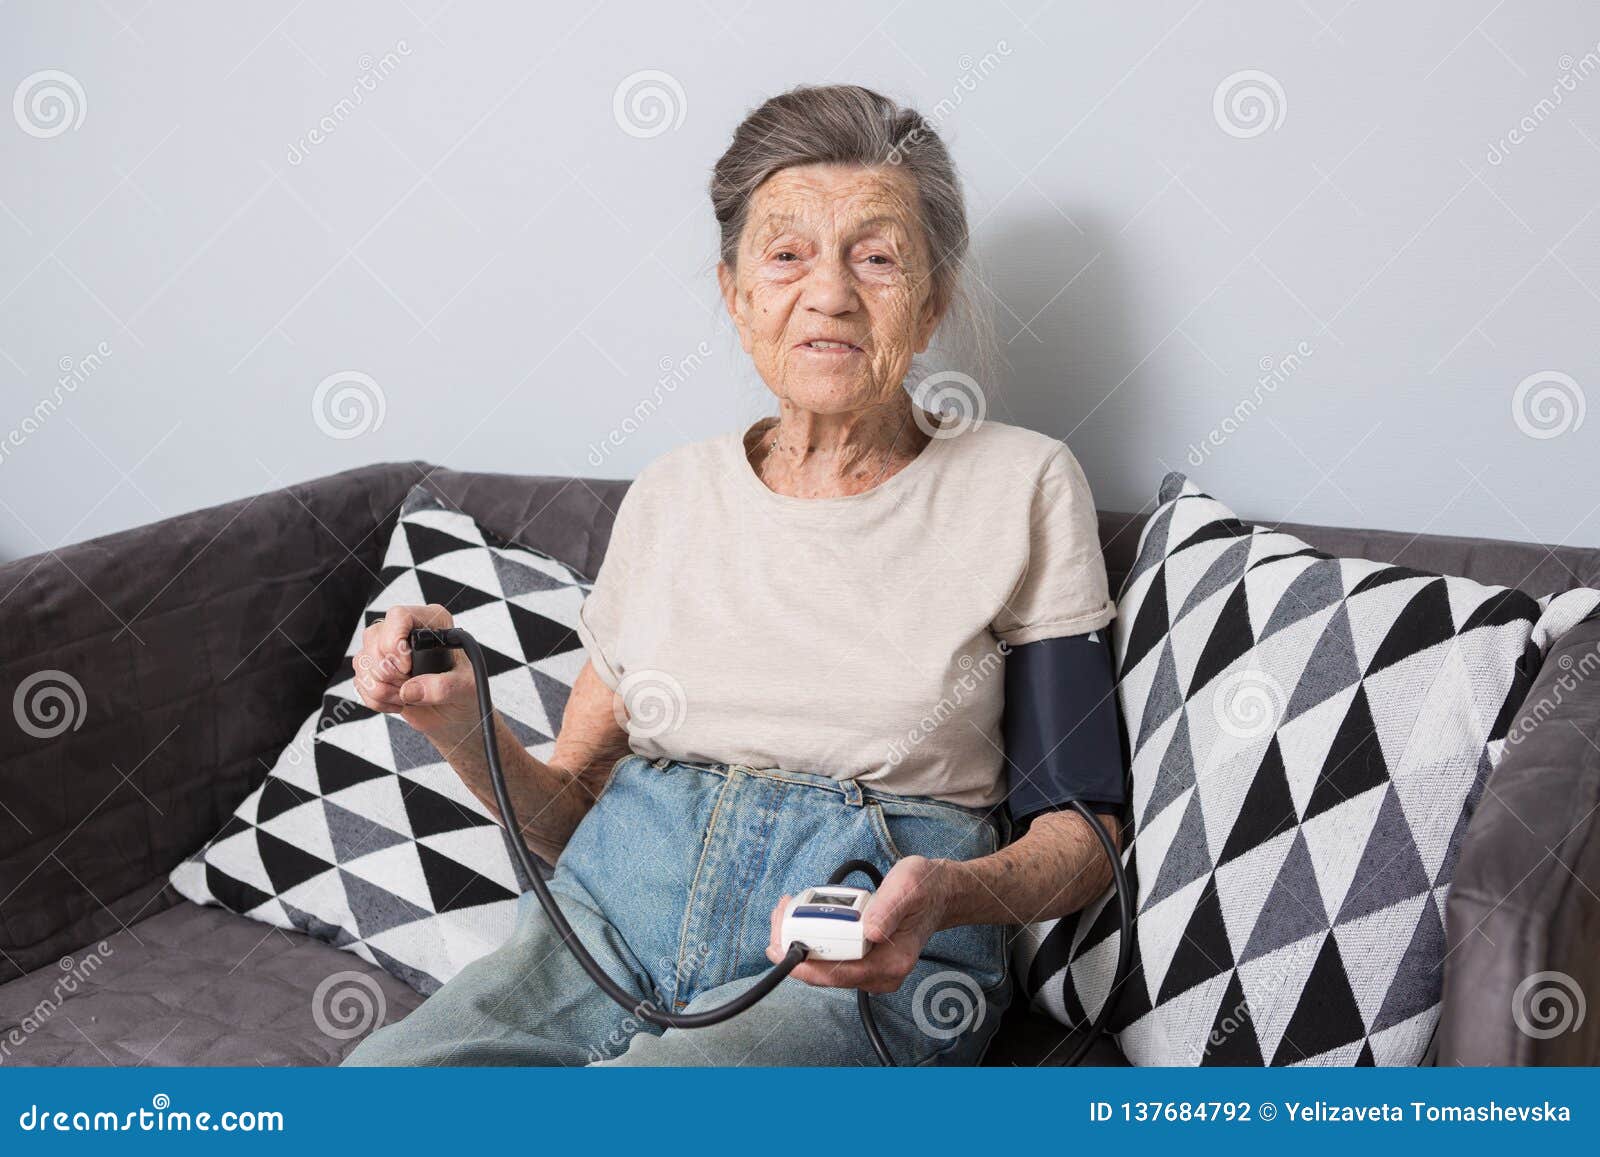 the topic is very old person and health problems. a senior caucasian woman, 90 years old, with wrinkles and gray hair